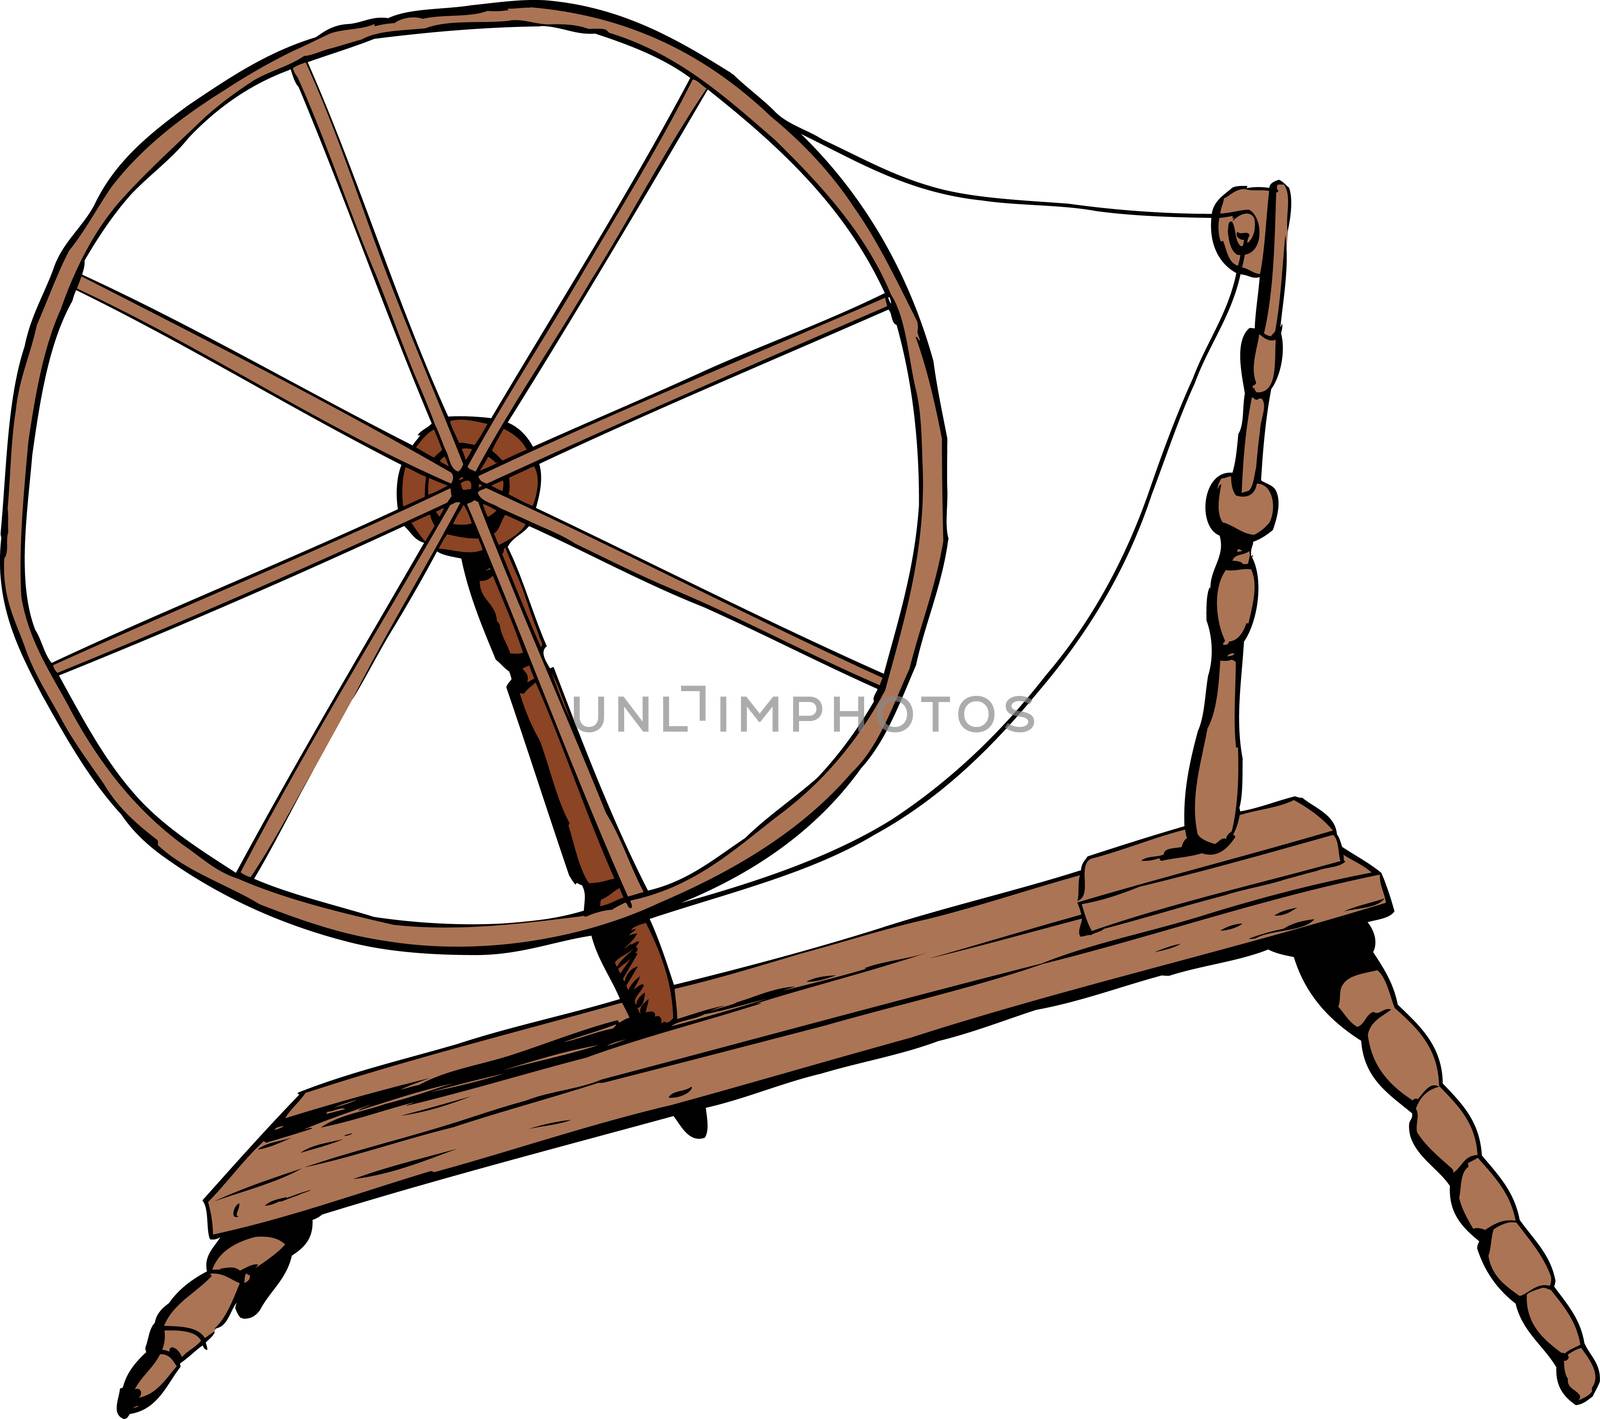 Illustration of side view on single old fashioned wooden 18th century era textile spinning wheel